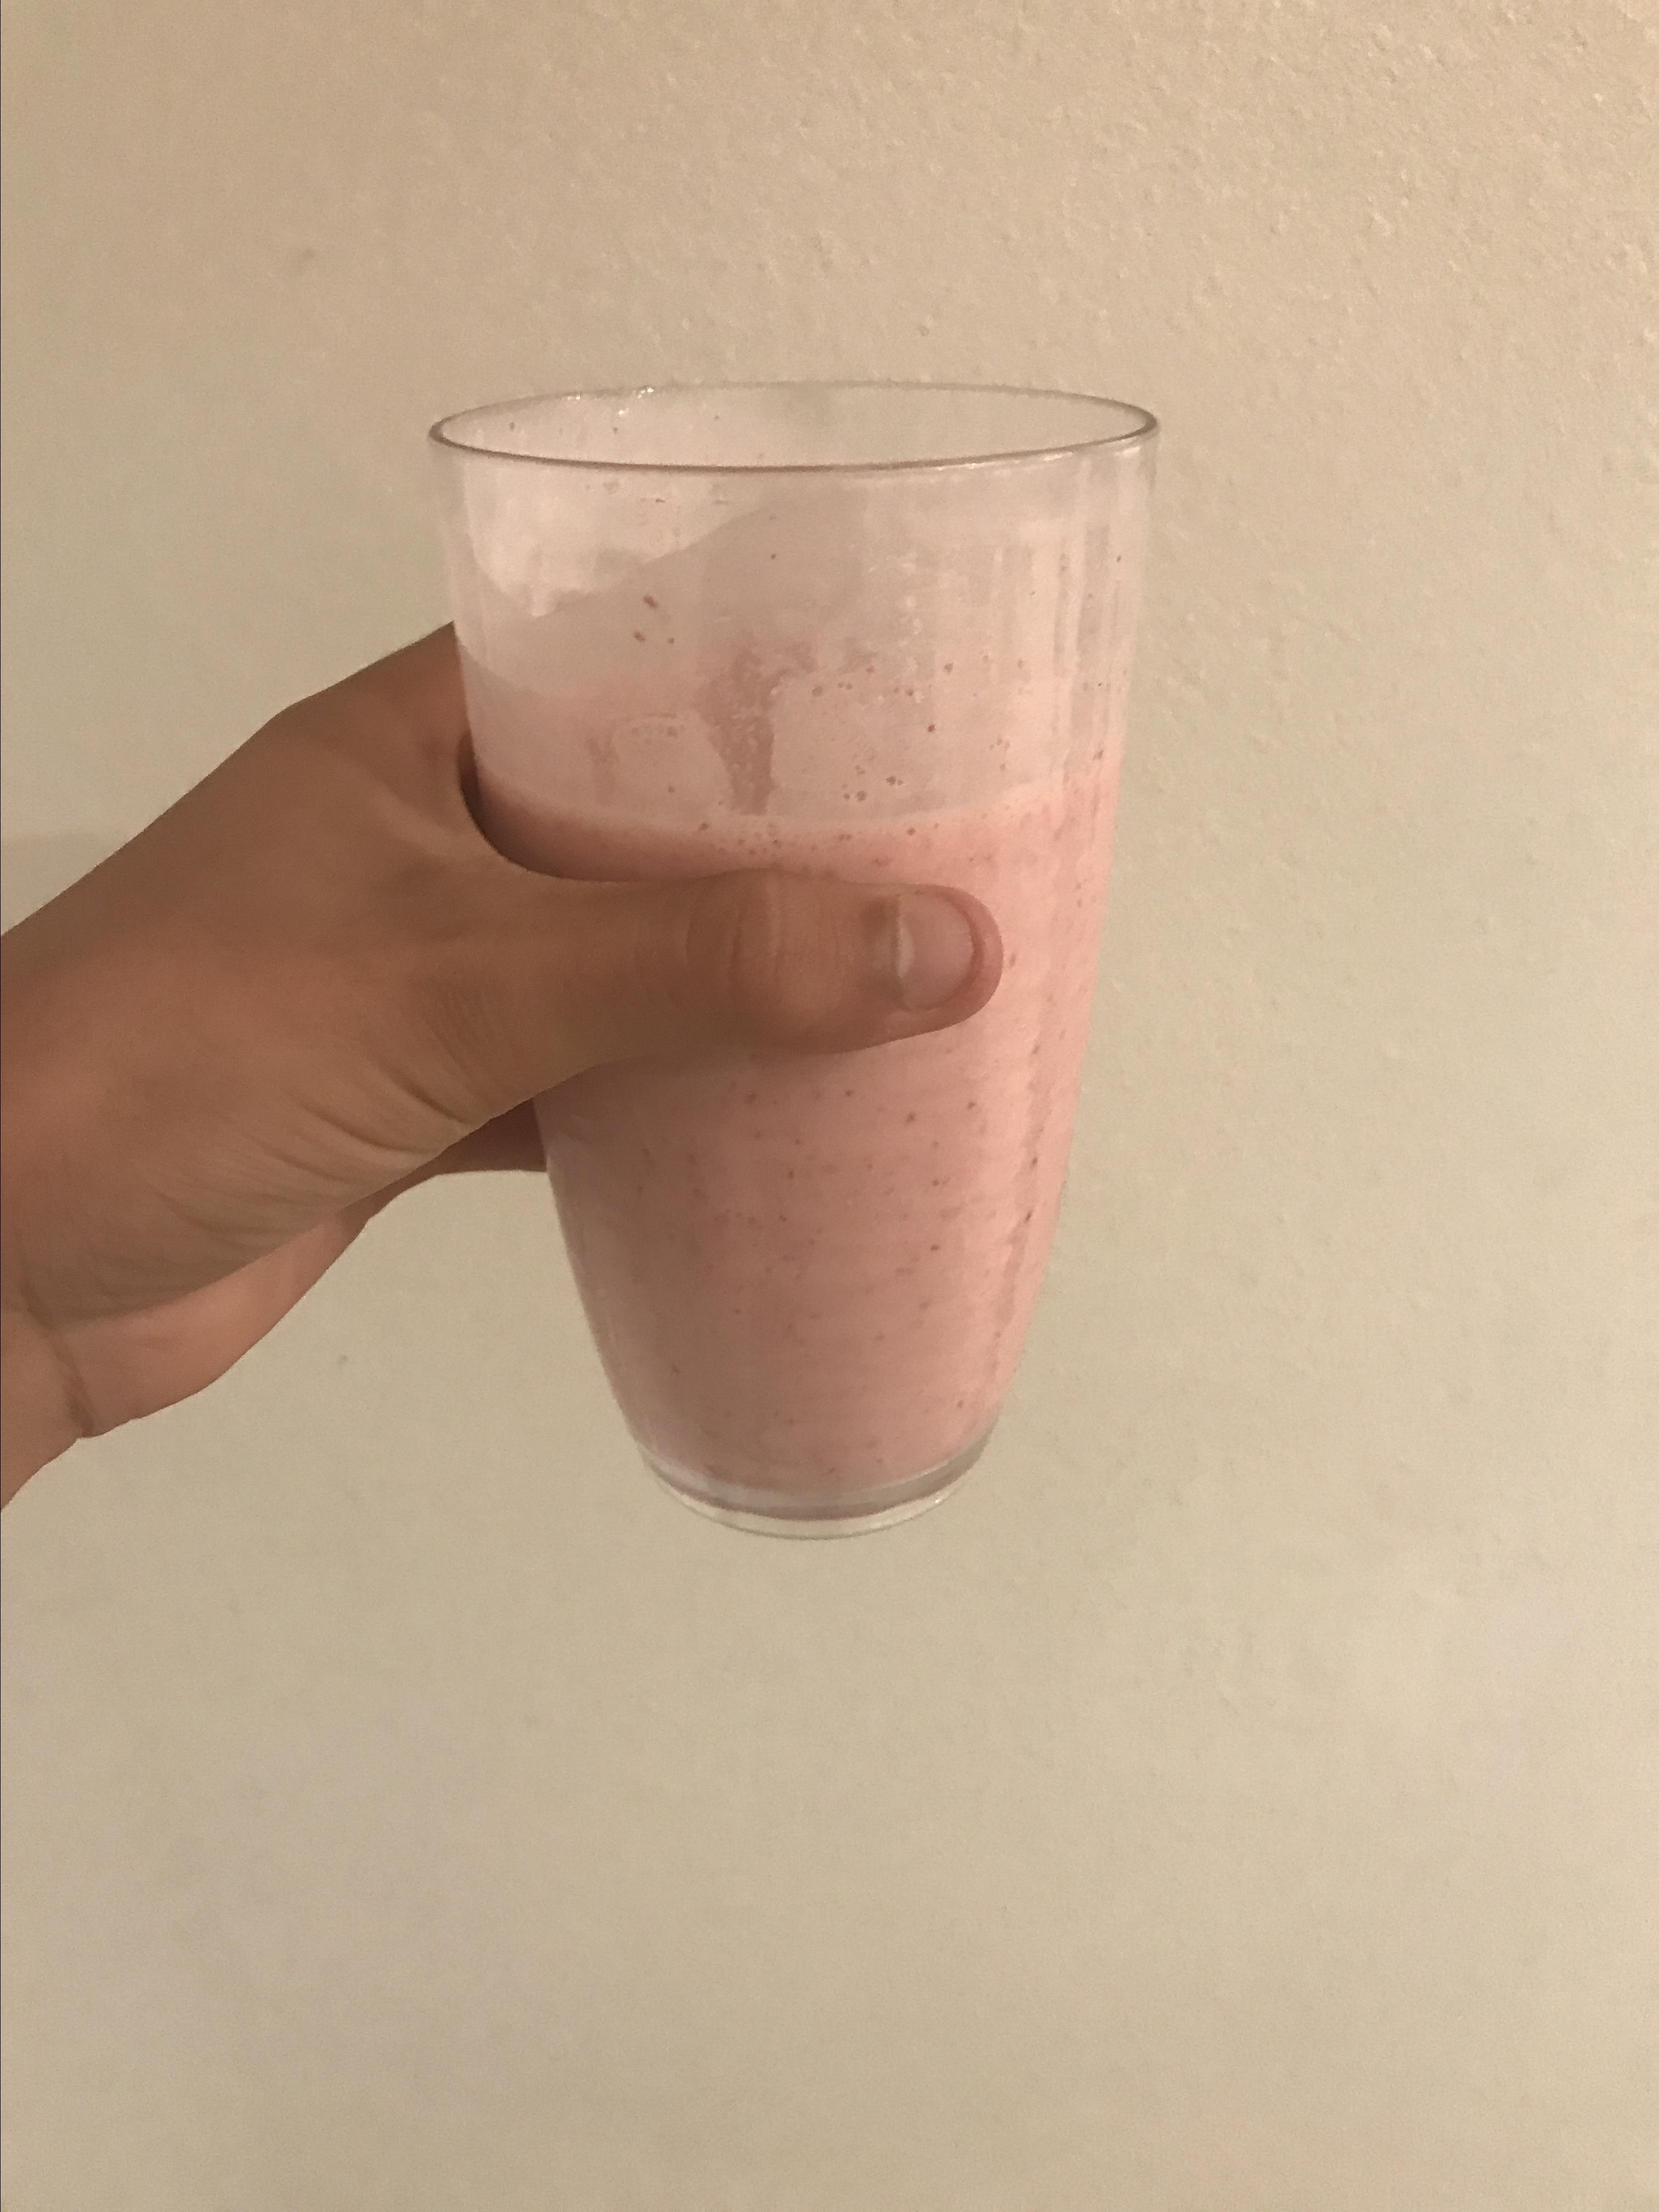 B and L's Strawberry Smoothie 